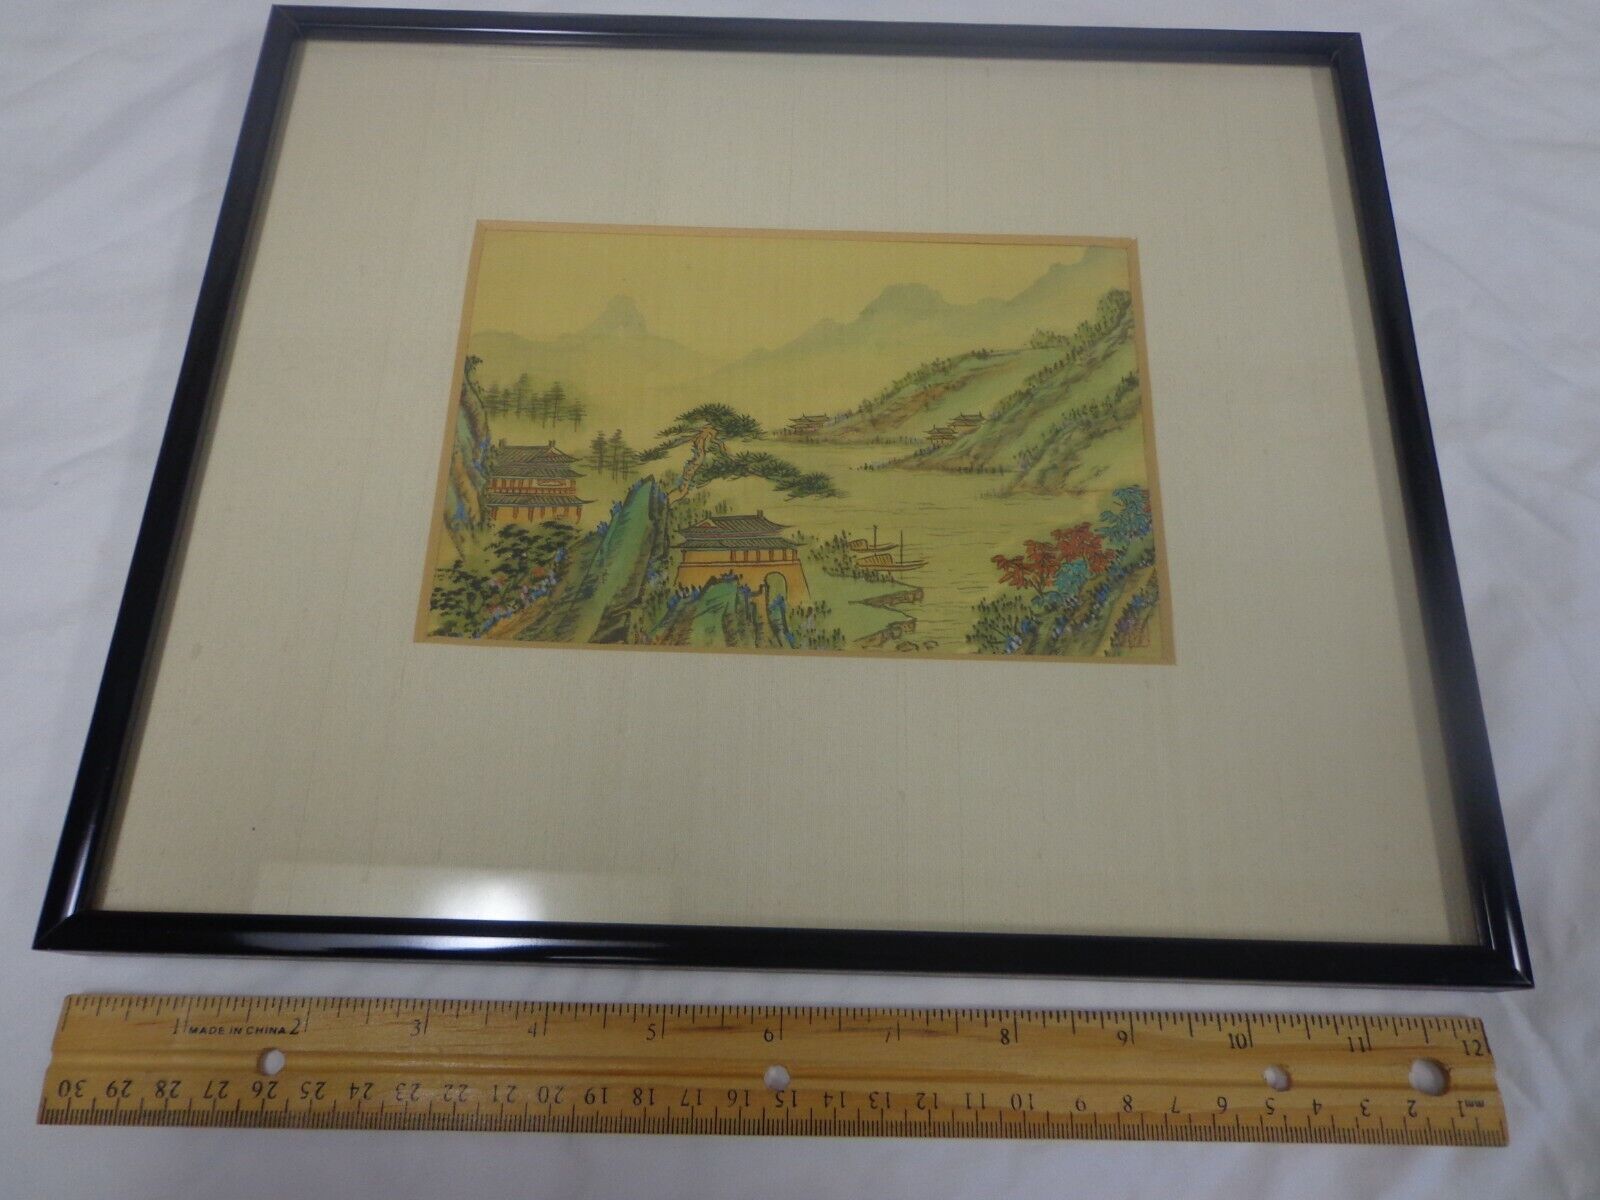 Asian Art on Silk - Valley Scene - Professionally Matted and Framed 